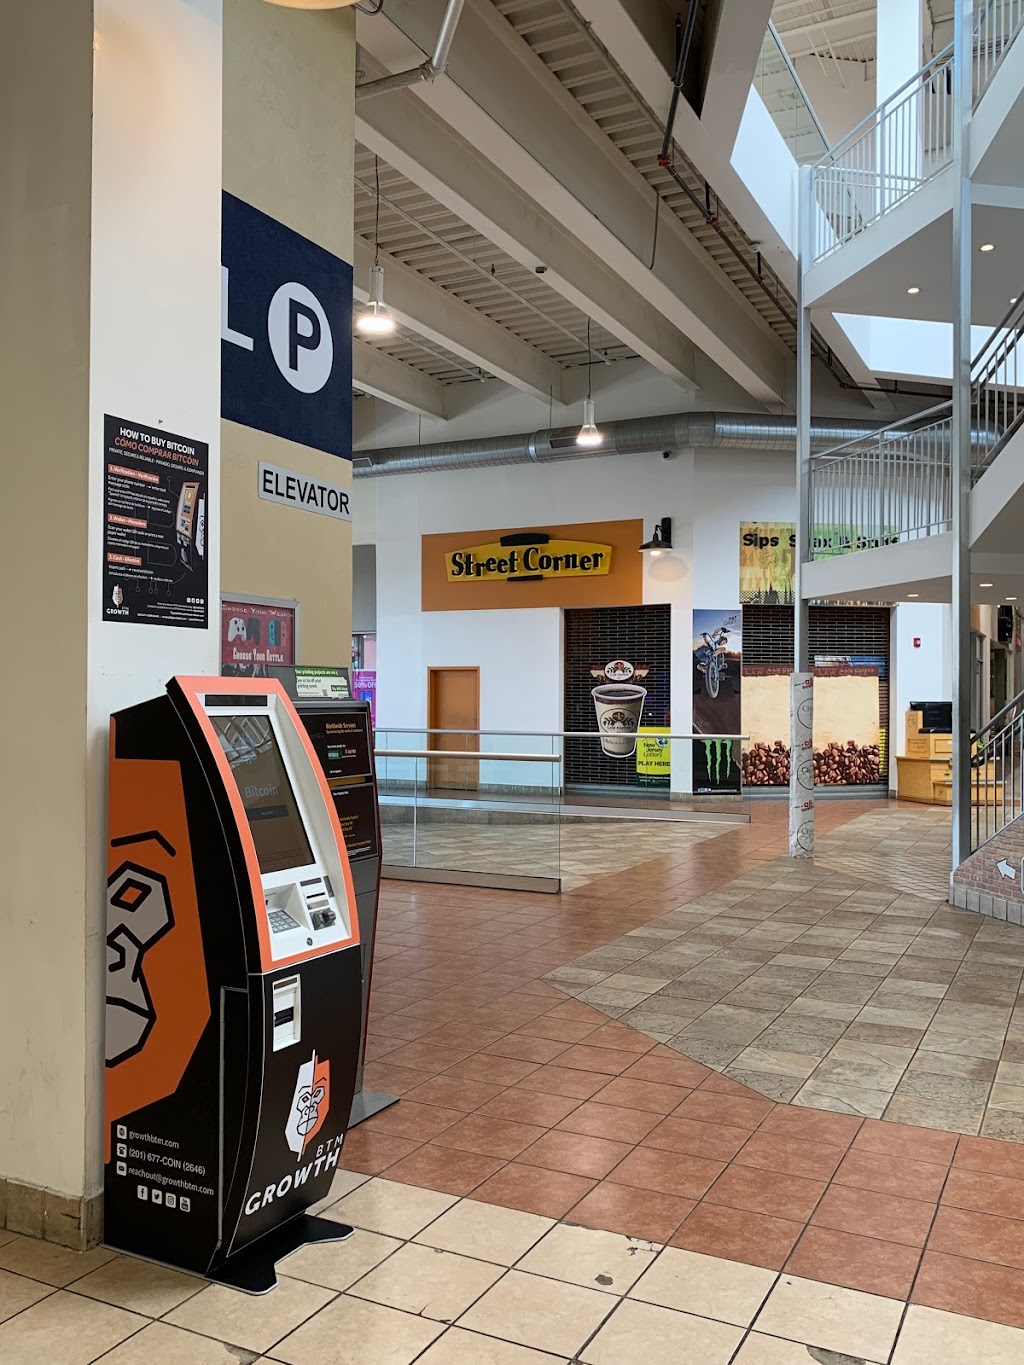 Growth BTM Bitcoin ATM at Center City Mall | 301 Main Street, Center City Mall Level P, Paterson, NJ 07505 | Phone: (201) 677-2646